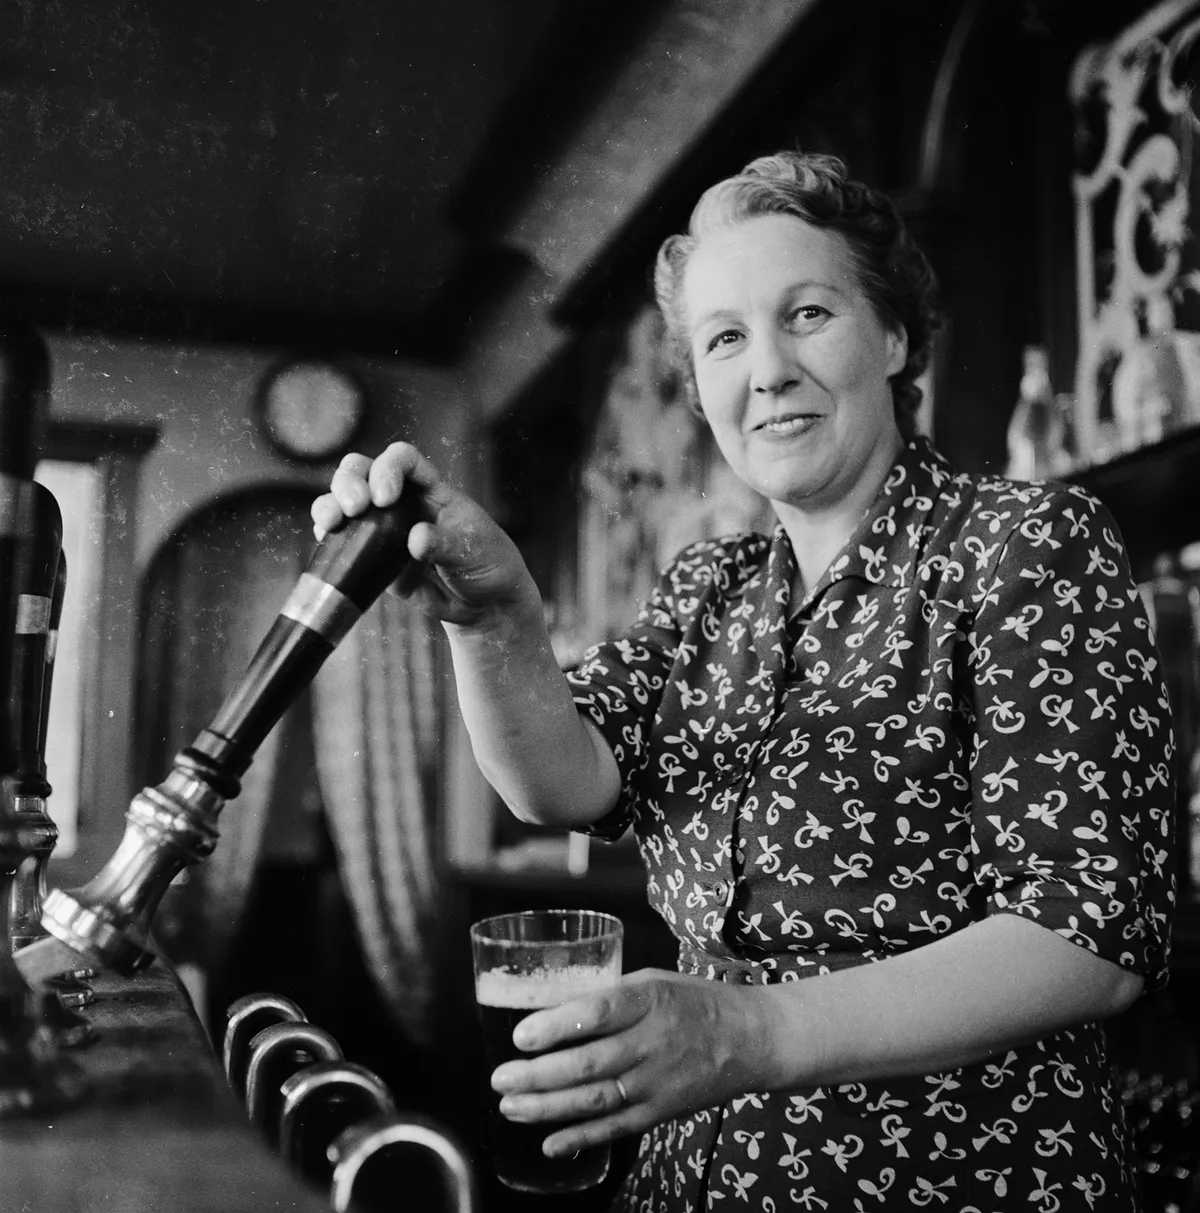 Black and white image of a cheerful woman pulling a pint of ale